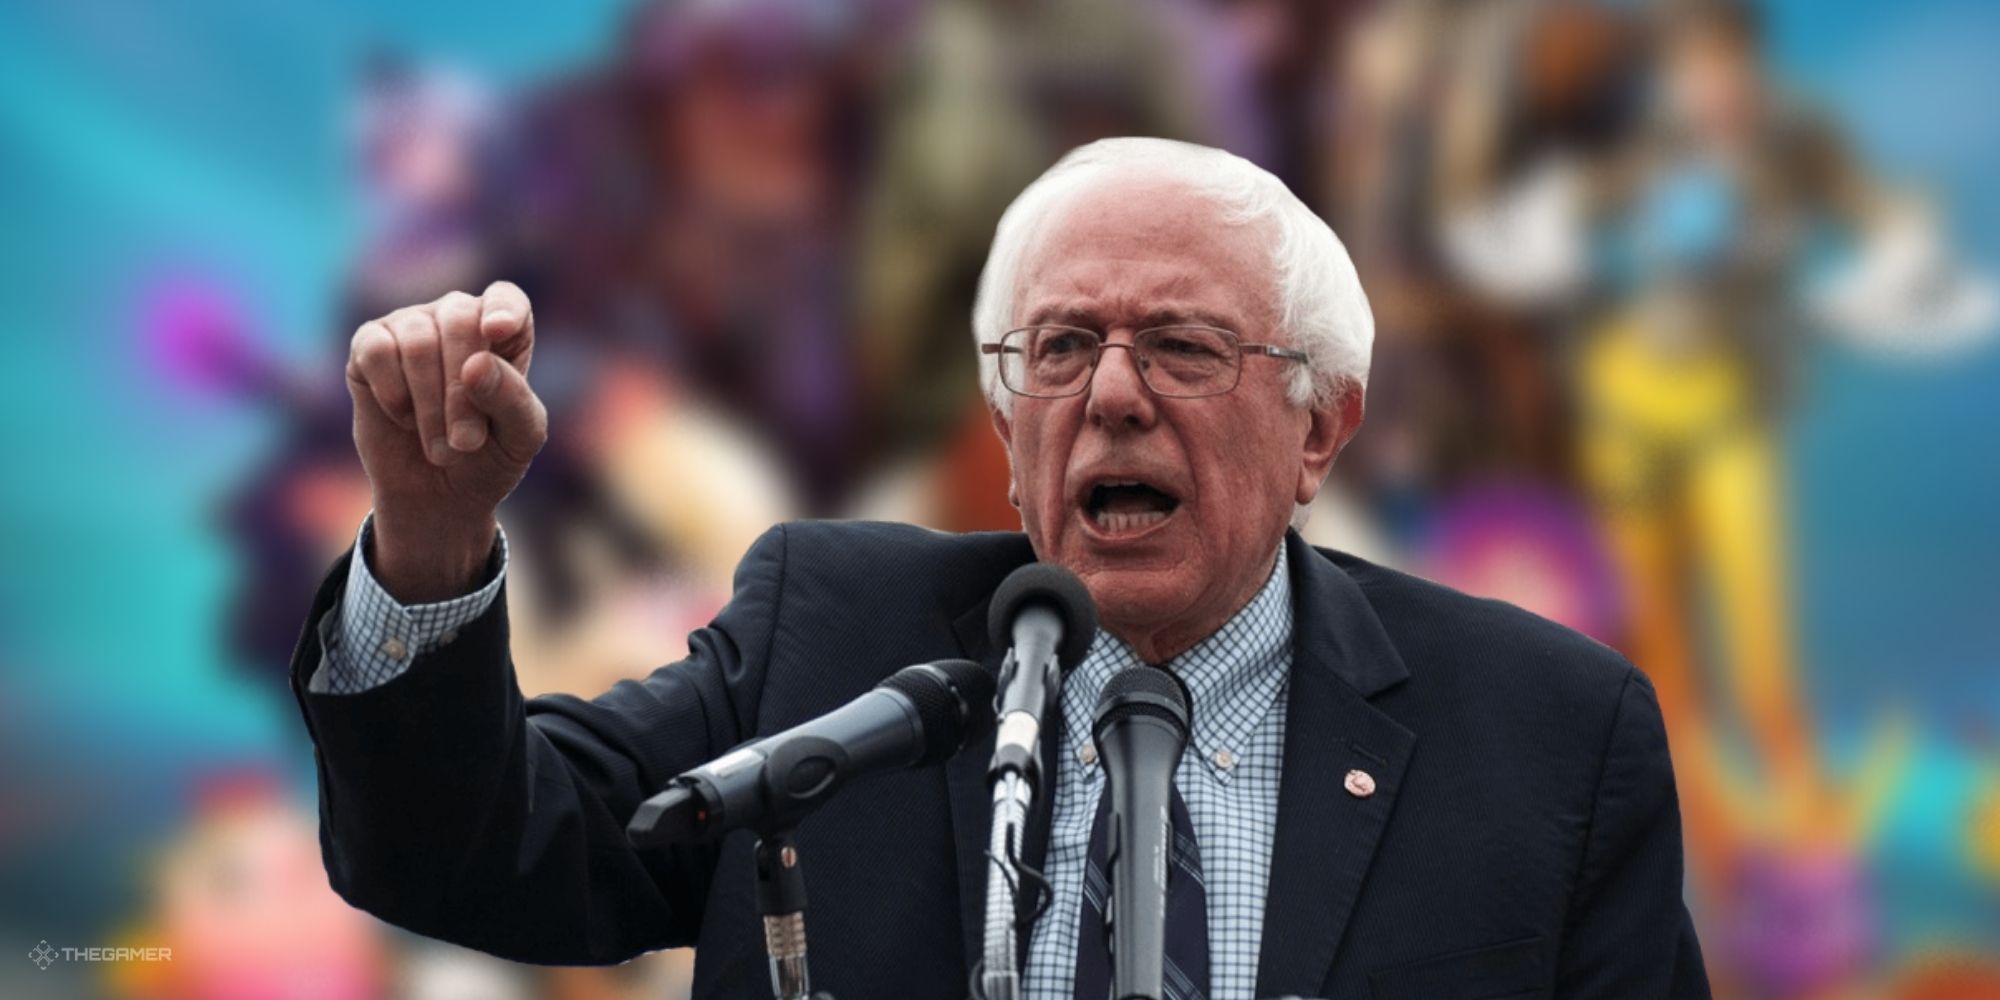 Bernie Sanders in front of a blurred image of Activision Blizzard game characters